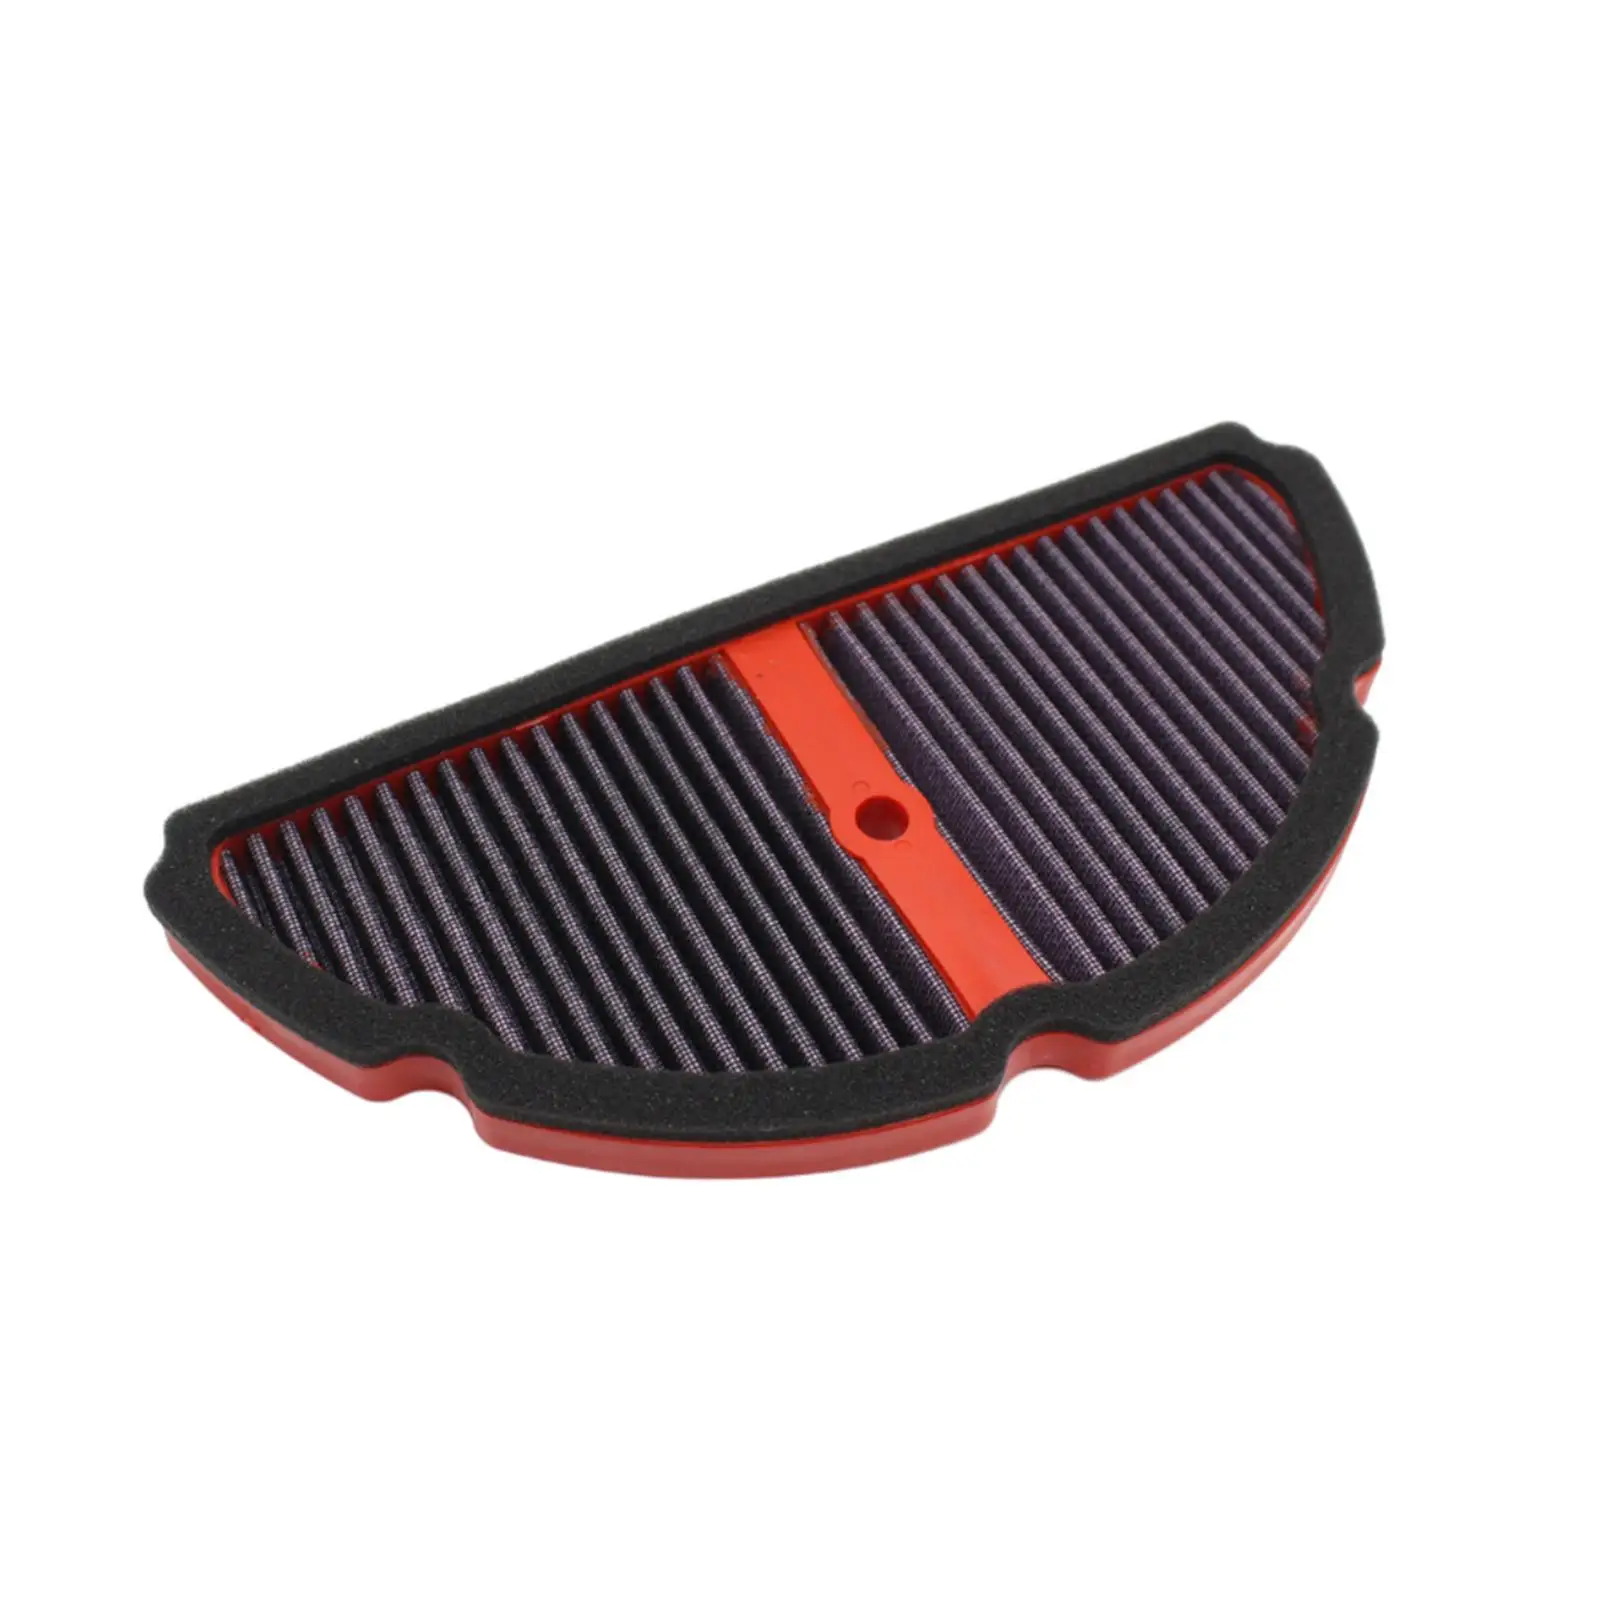 Motorbike Air Filter Intake Accessories Air Filters for Benellis BN502 2014-2019 BN502R 2017-19 Tnt600 2018-19 Bj600